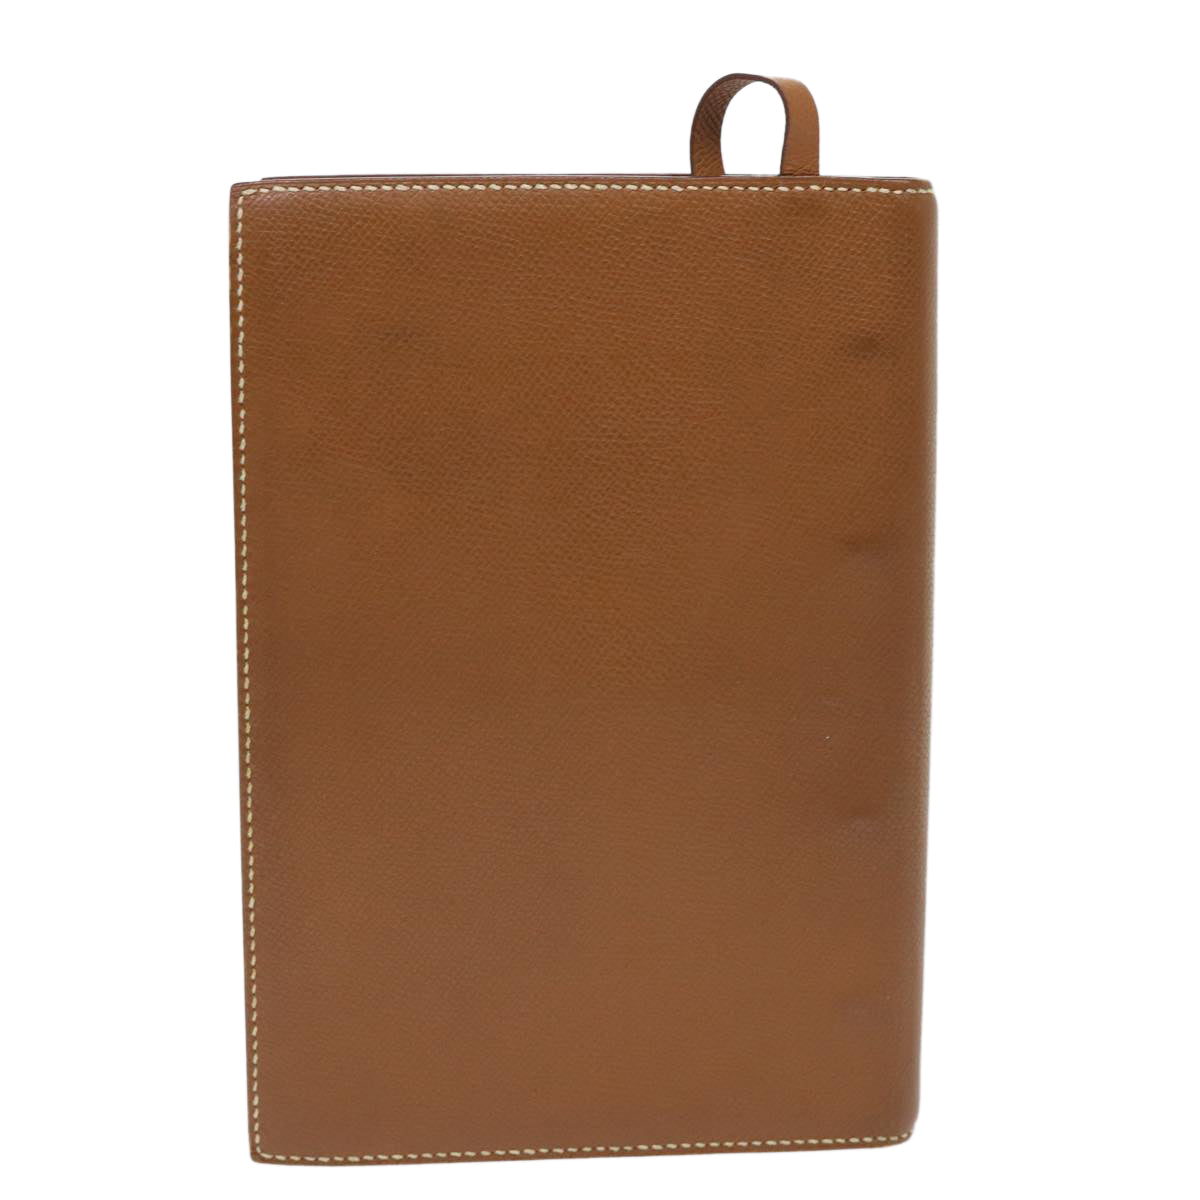 HERMES Day Planner Cover Leather Brown Auth ac2154 - 0